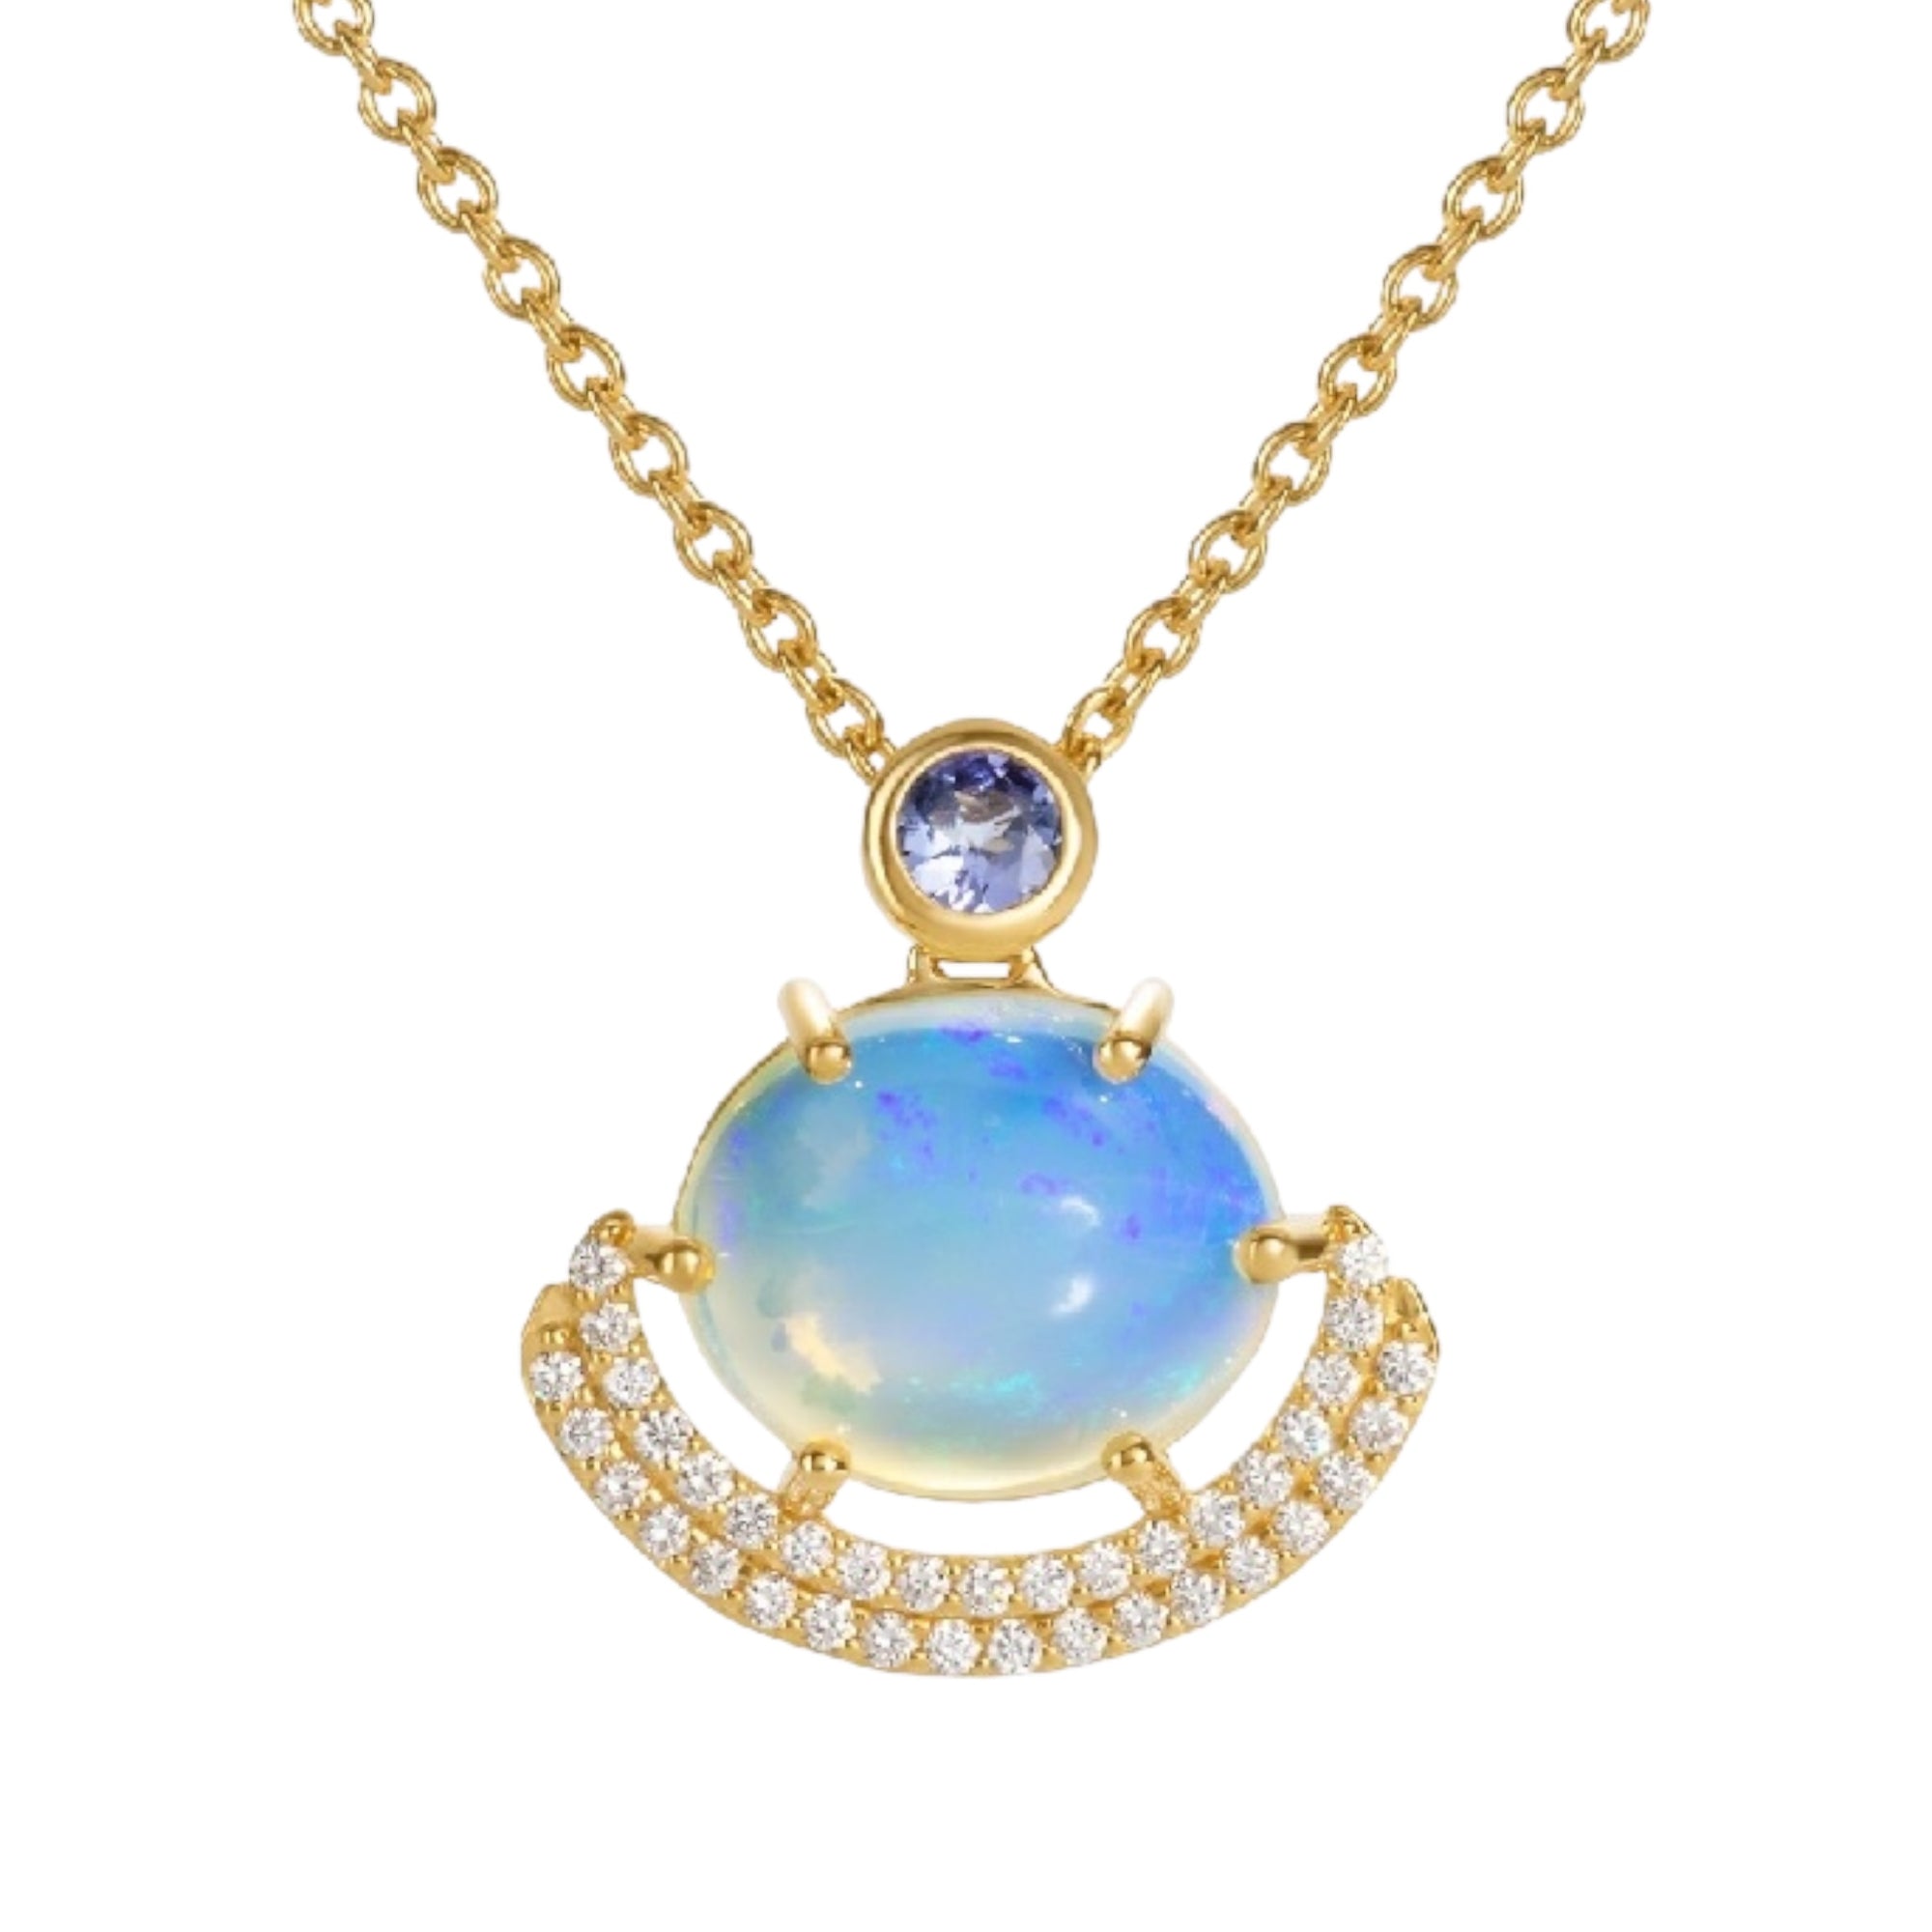 Eclipse Pendant - Welo Opal - 14k by Martha Seely available at Talisman Collection Fine Jewelers in El Dorado Hills, CA and online. Stats: Celebrate every eclipse with this stunning 14k yellow gold pendant featuring a flashy Welo opal measuring 14 x 12mm, that is accented with 0.612 cts of diamonds and a 3mm round faceted tanzanite. The dreamy pendant hangs from an 18” 1.5mm cable chain and is secured with a lobster clasp.